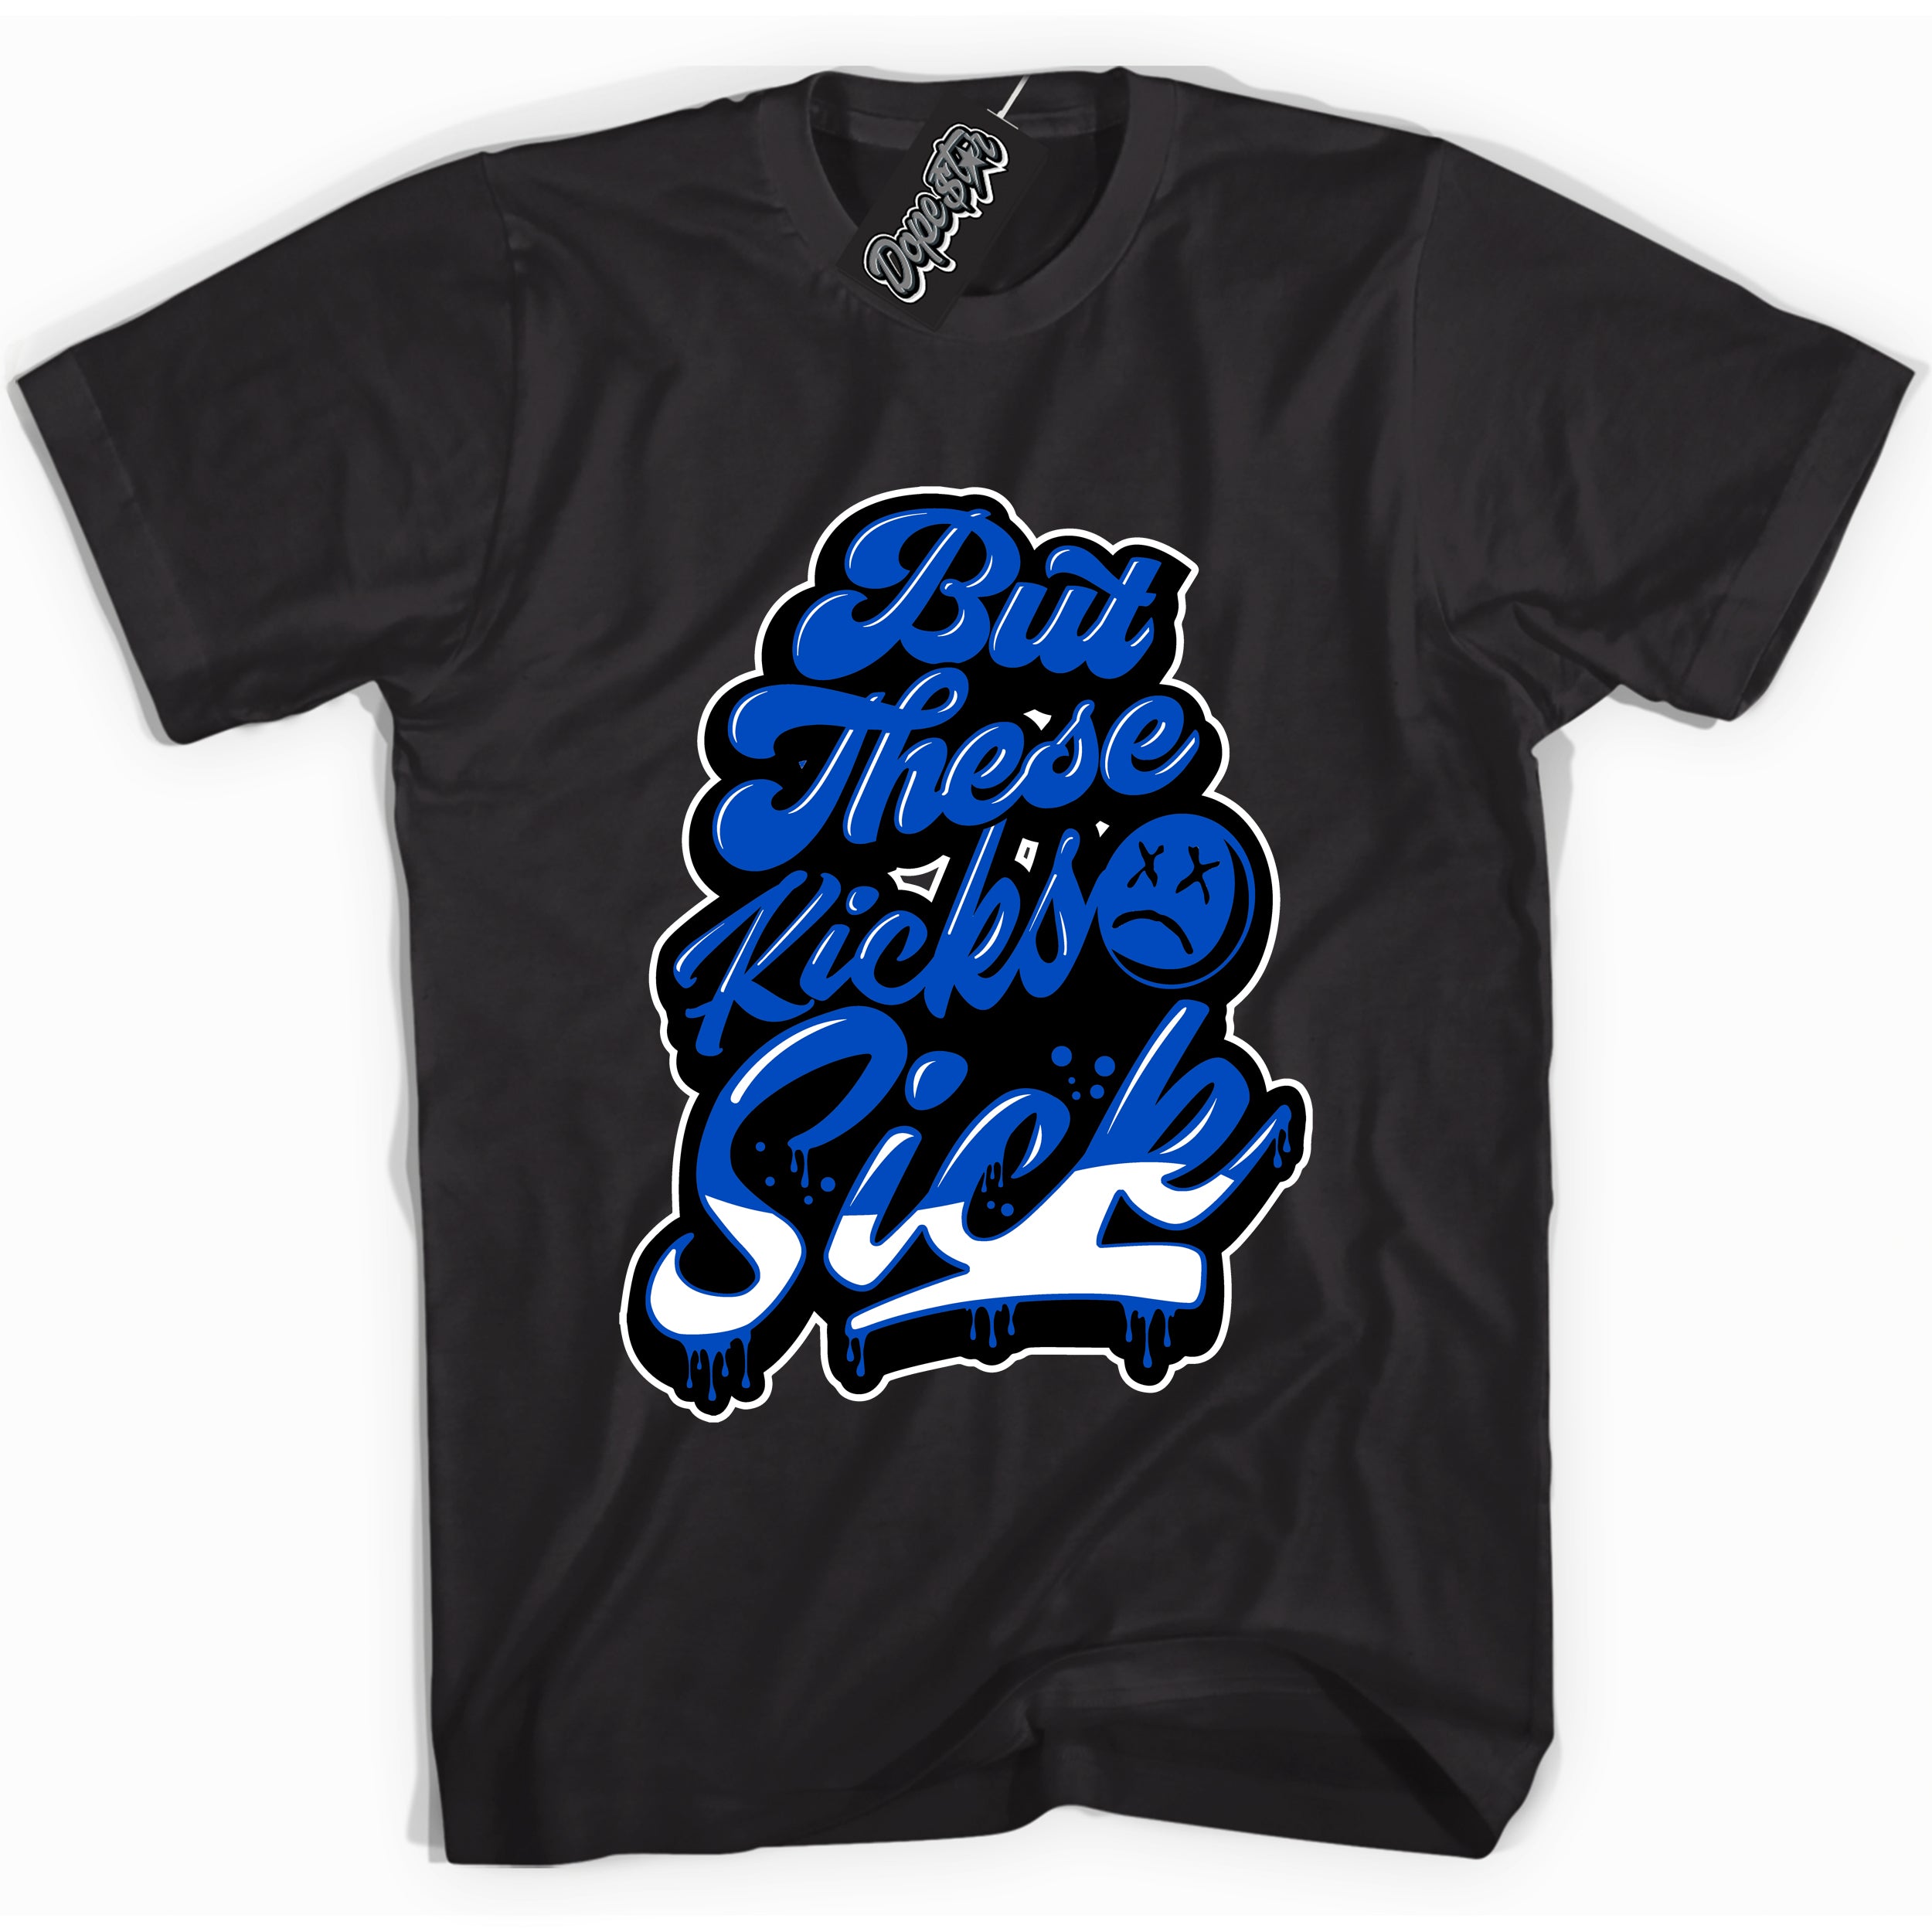 Cool Black graphic tee with Kick Sick print, that perfectly matches OG Royal Reimagined 1s sneakers 